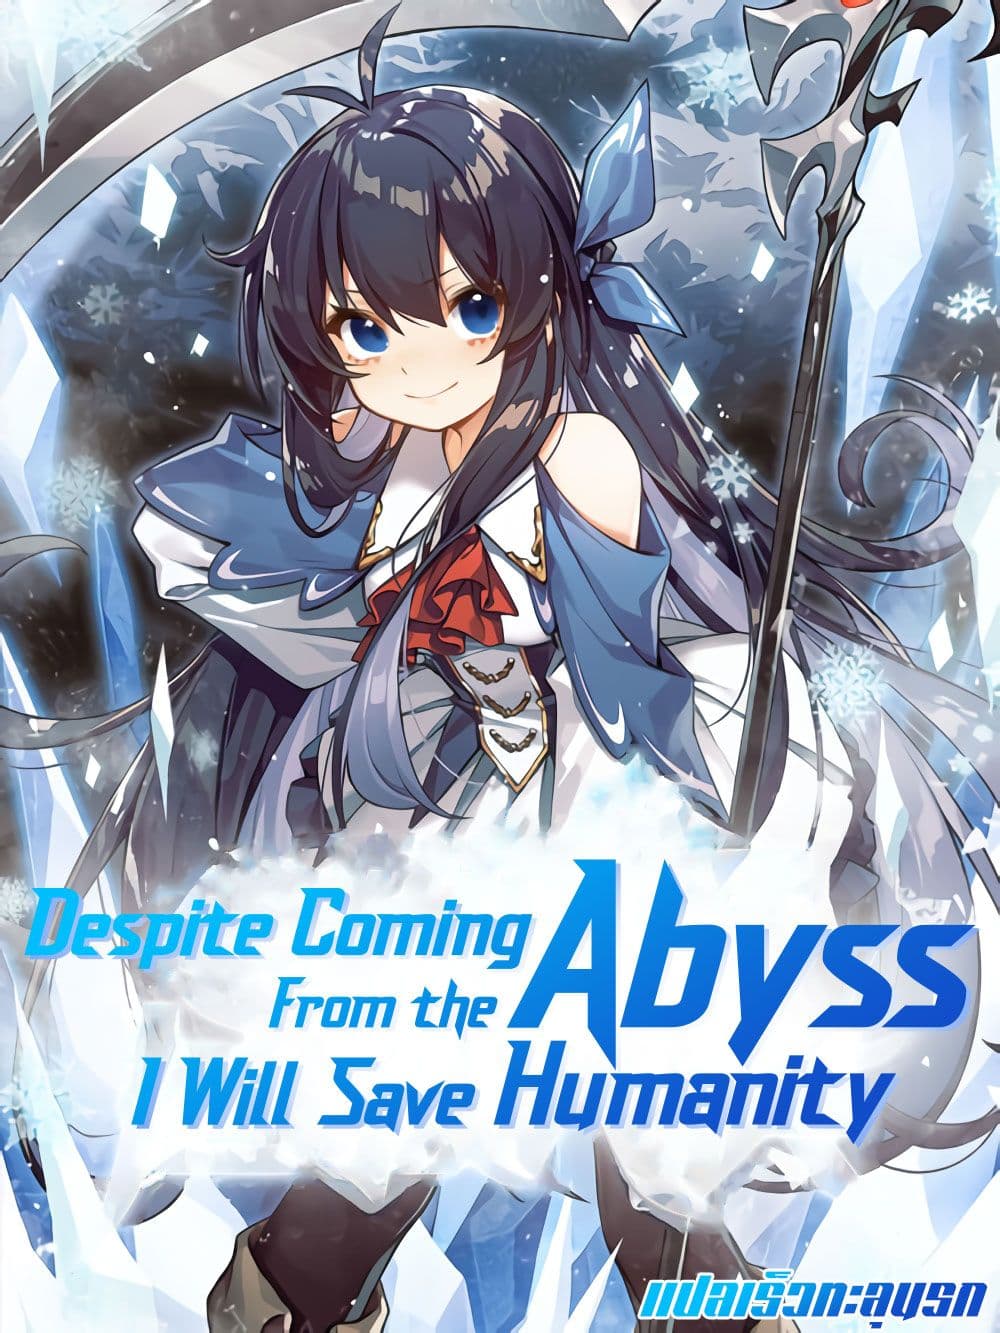 Despite Coming From the Abyss, I Will Save Humanity 20-20